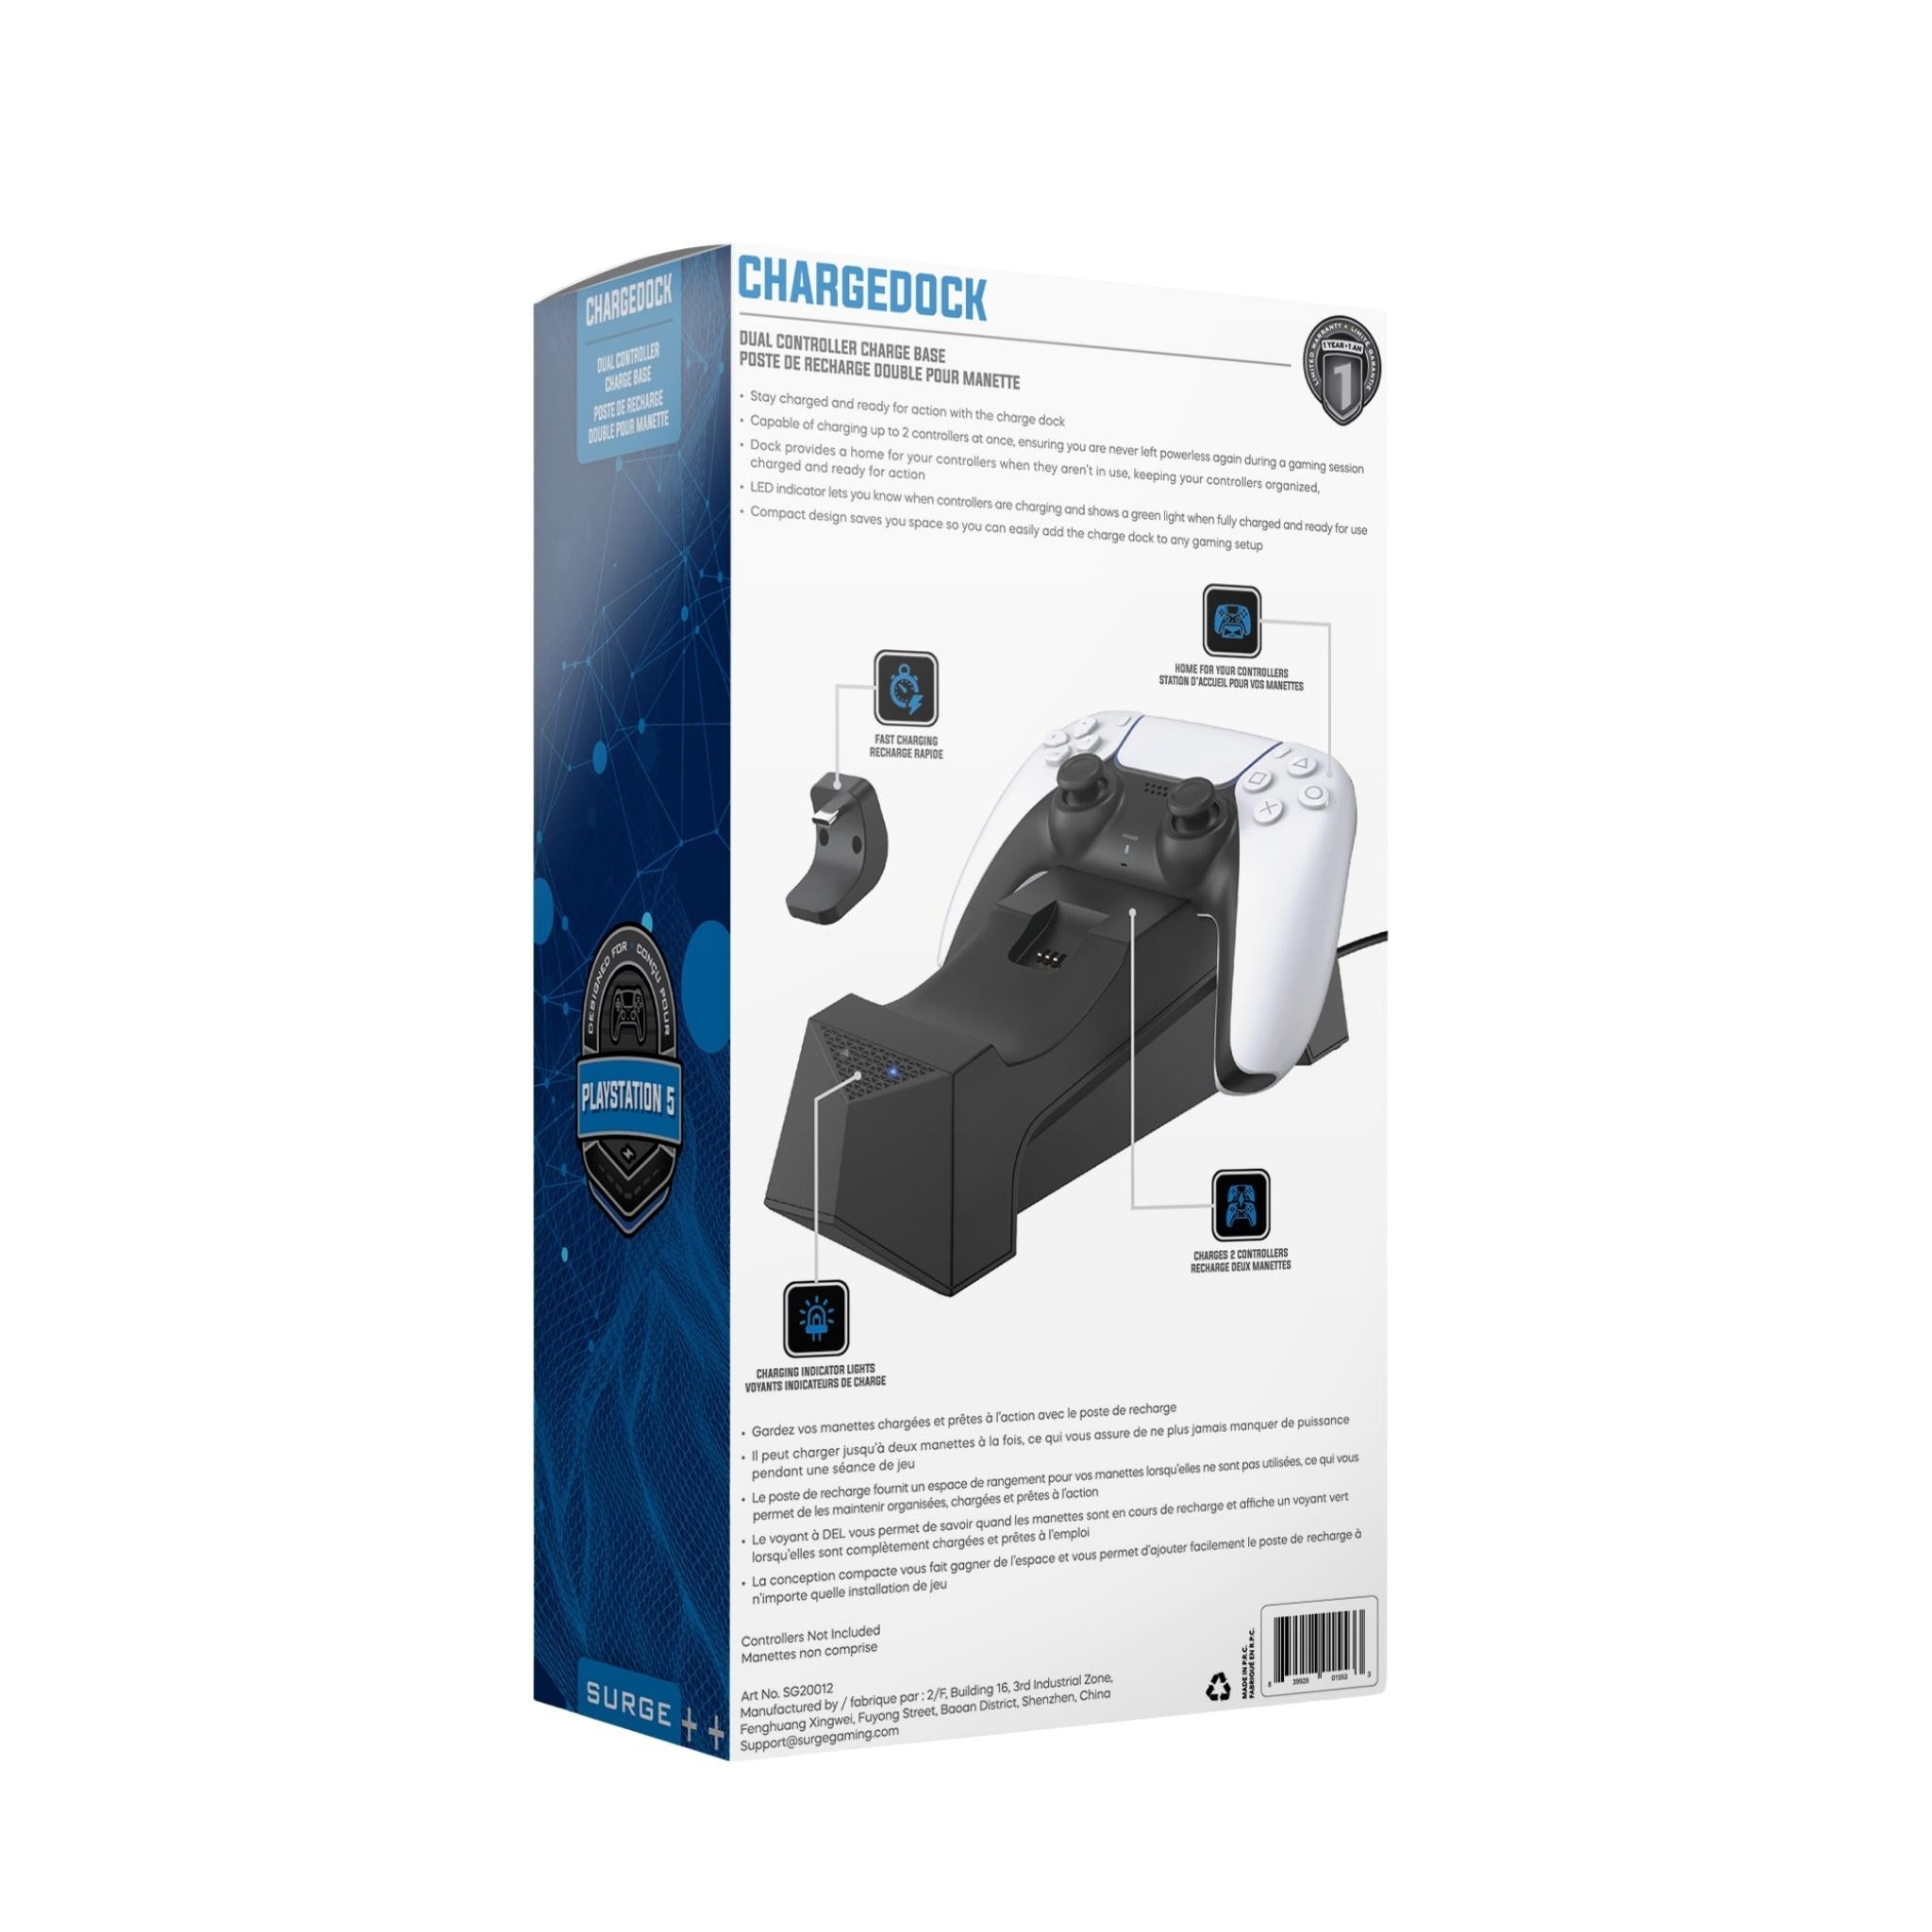 Chargeur Manette PS5, Dock Station Support Double USB de Charge